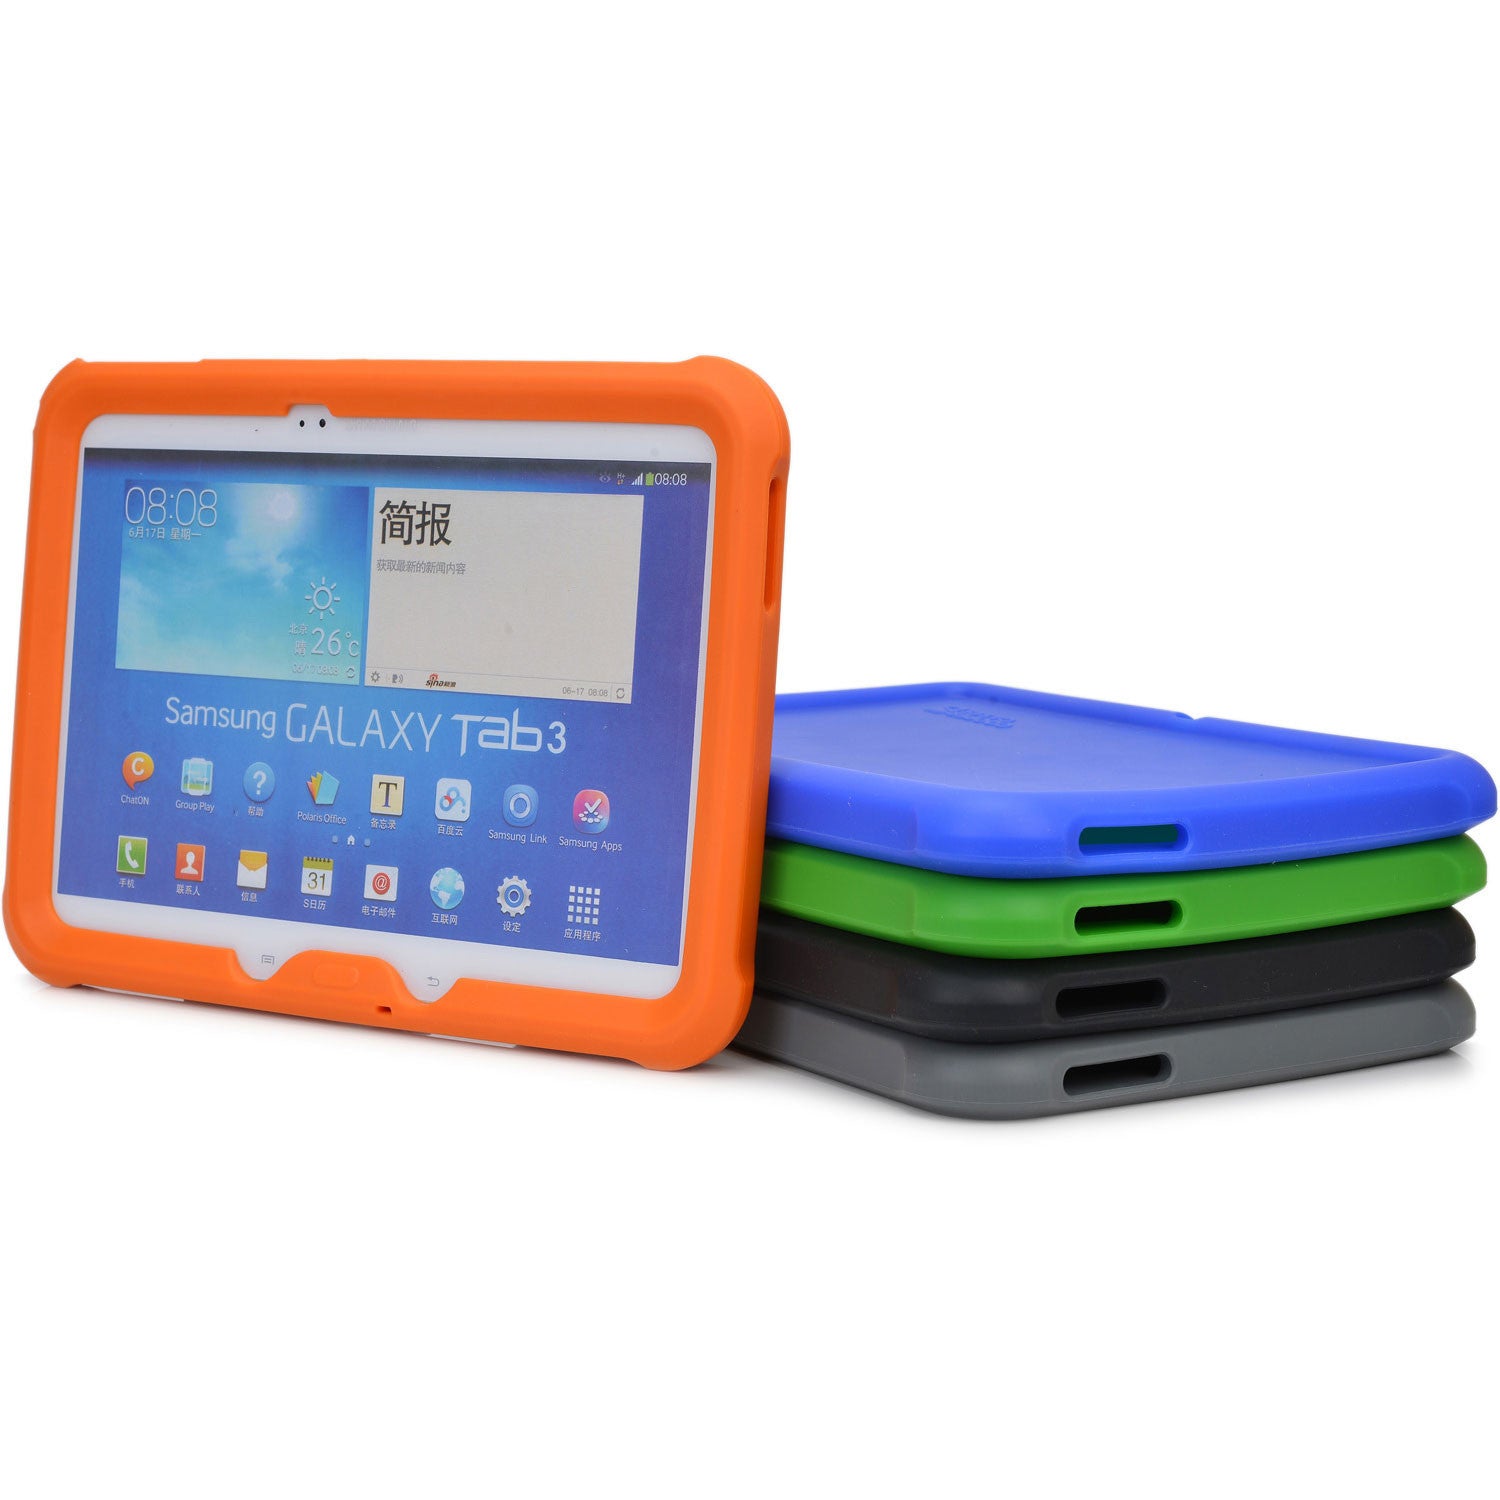 Cooper Bounce Rugged Reinforced Silicon TPU Gel Back Shell Armor Case For Samsung Galaxy Tab